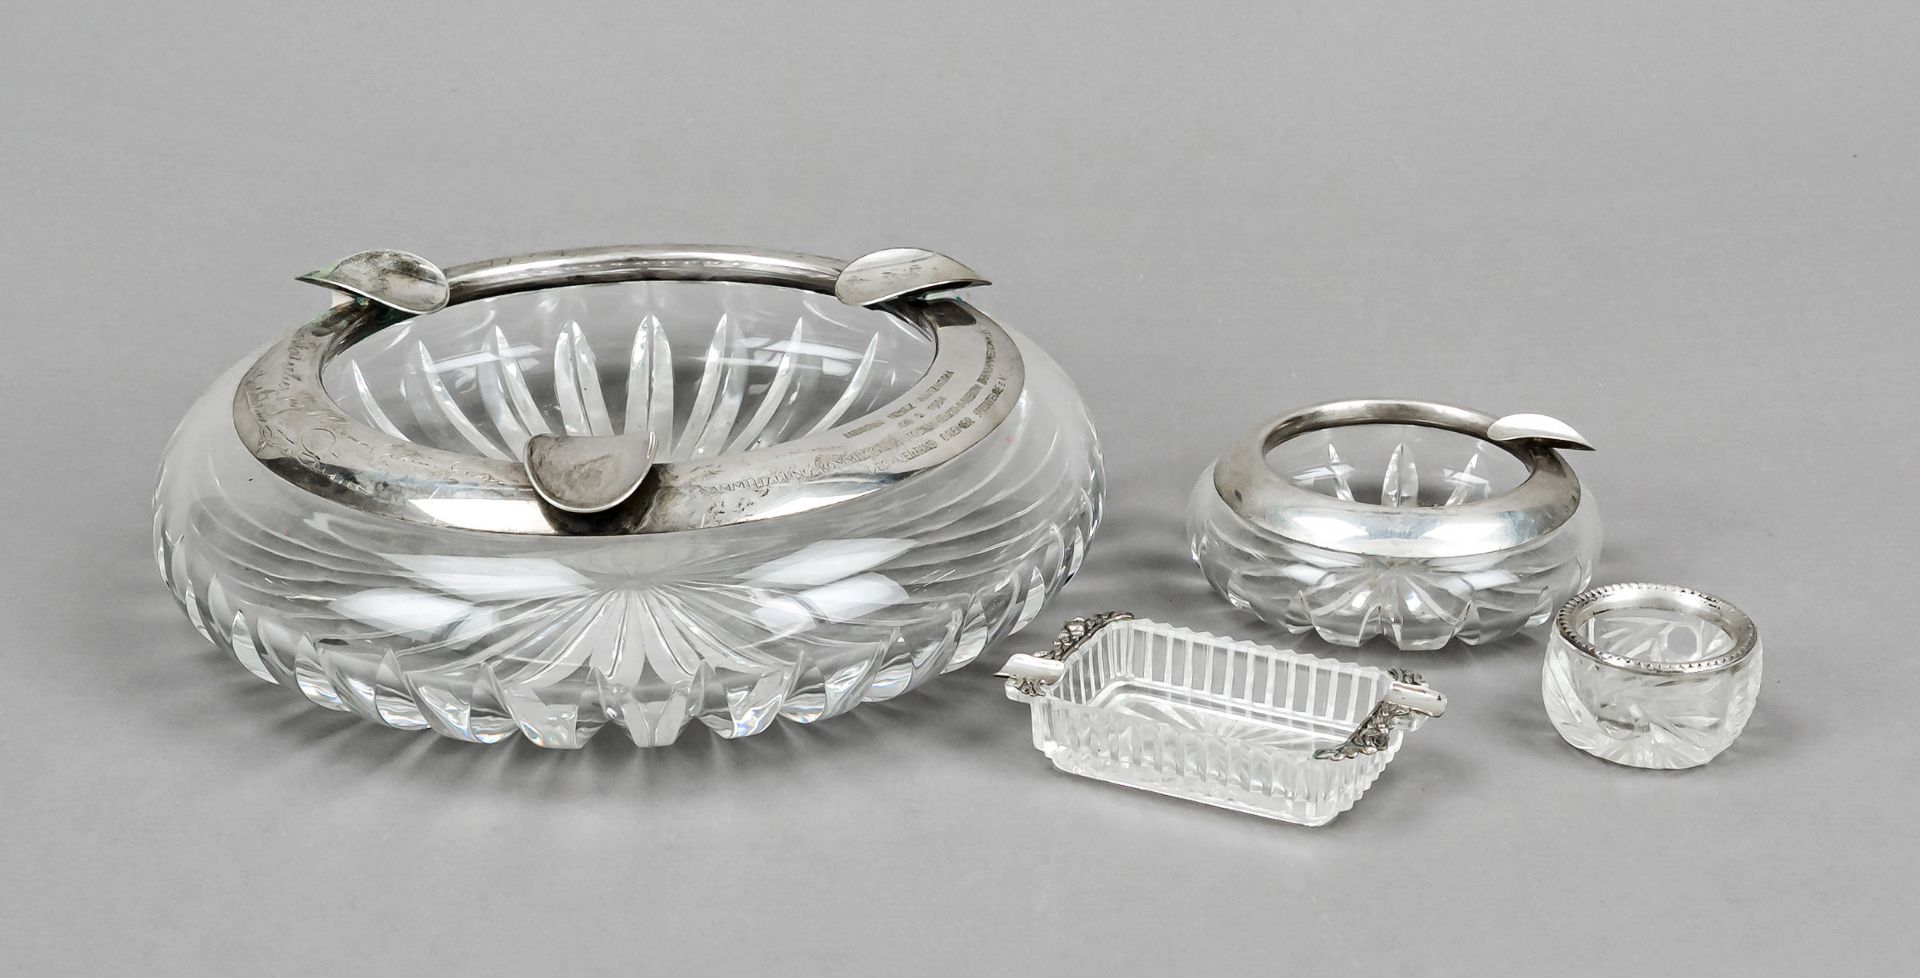 Mixed lot of four pieces, 20th century, 3 ashtrays and saliere, each clear glass with silver rim